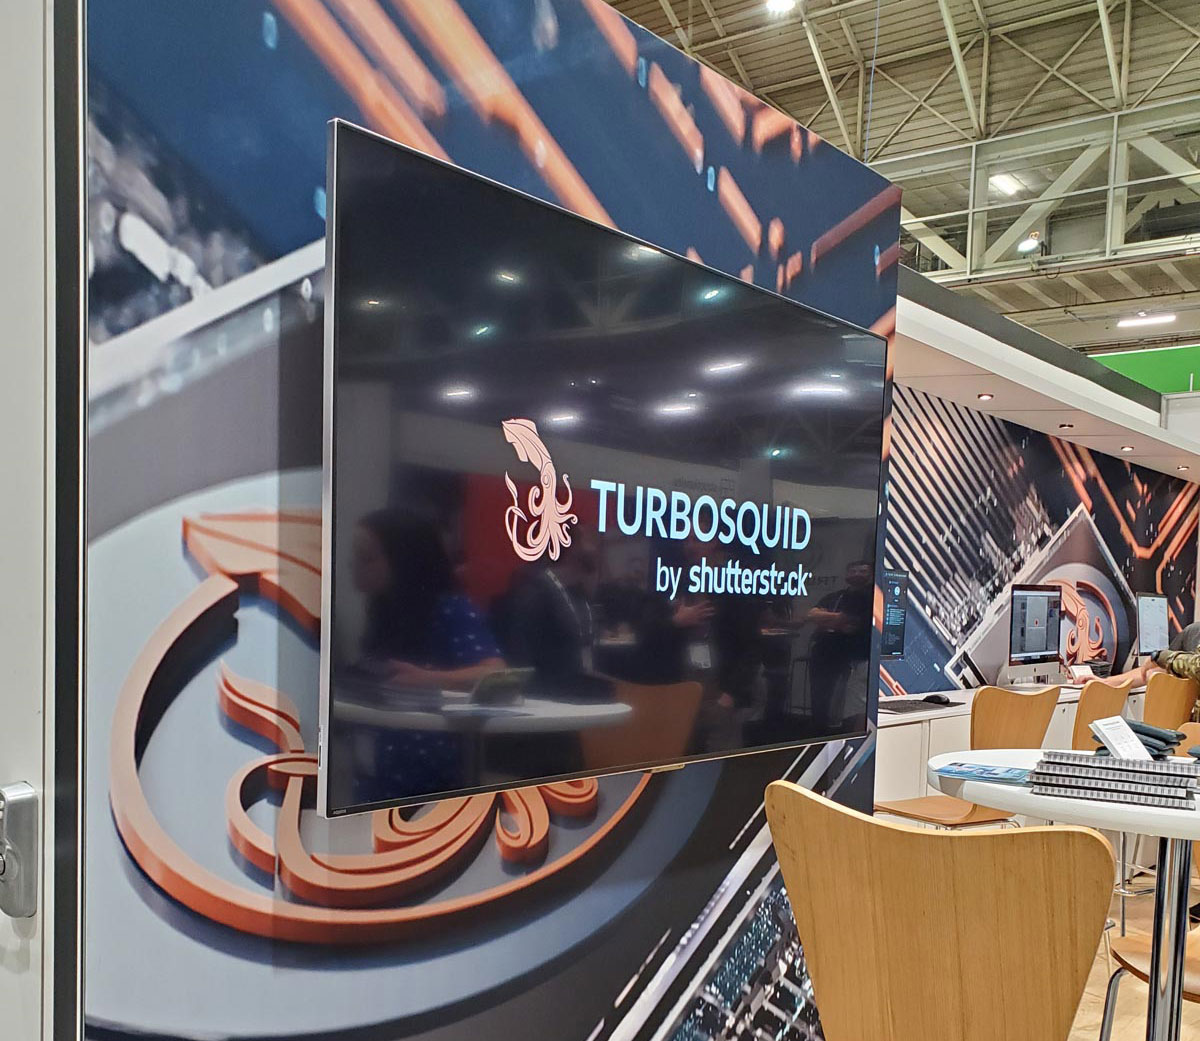 A close up of the TurboSquid booth at Autodesk University 2022